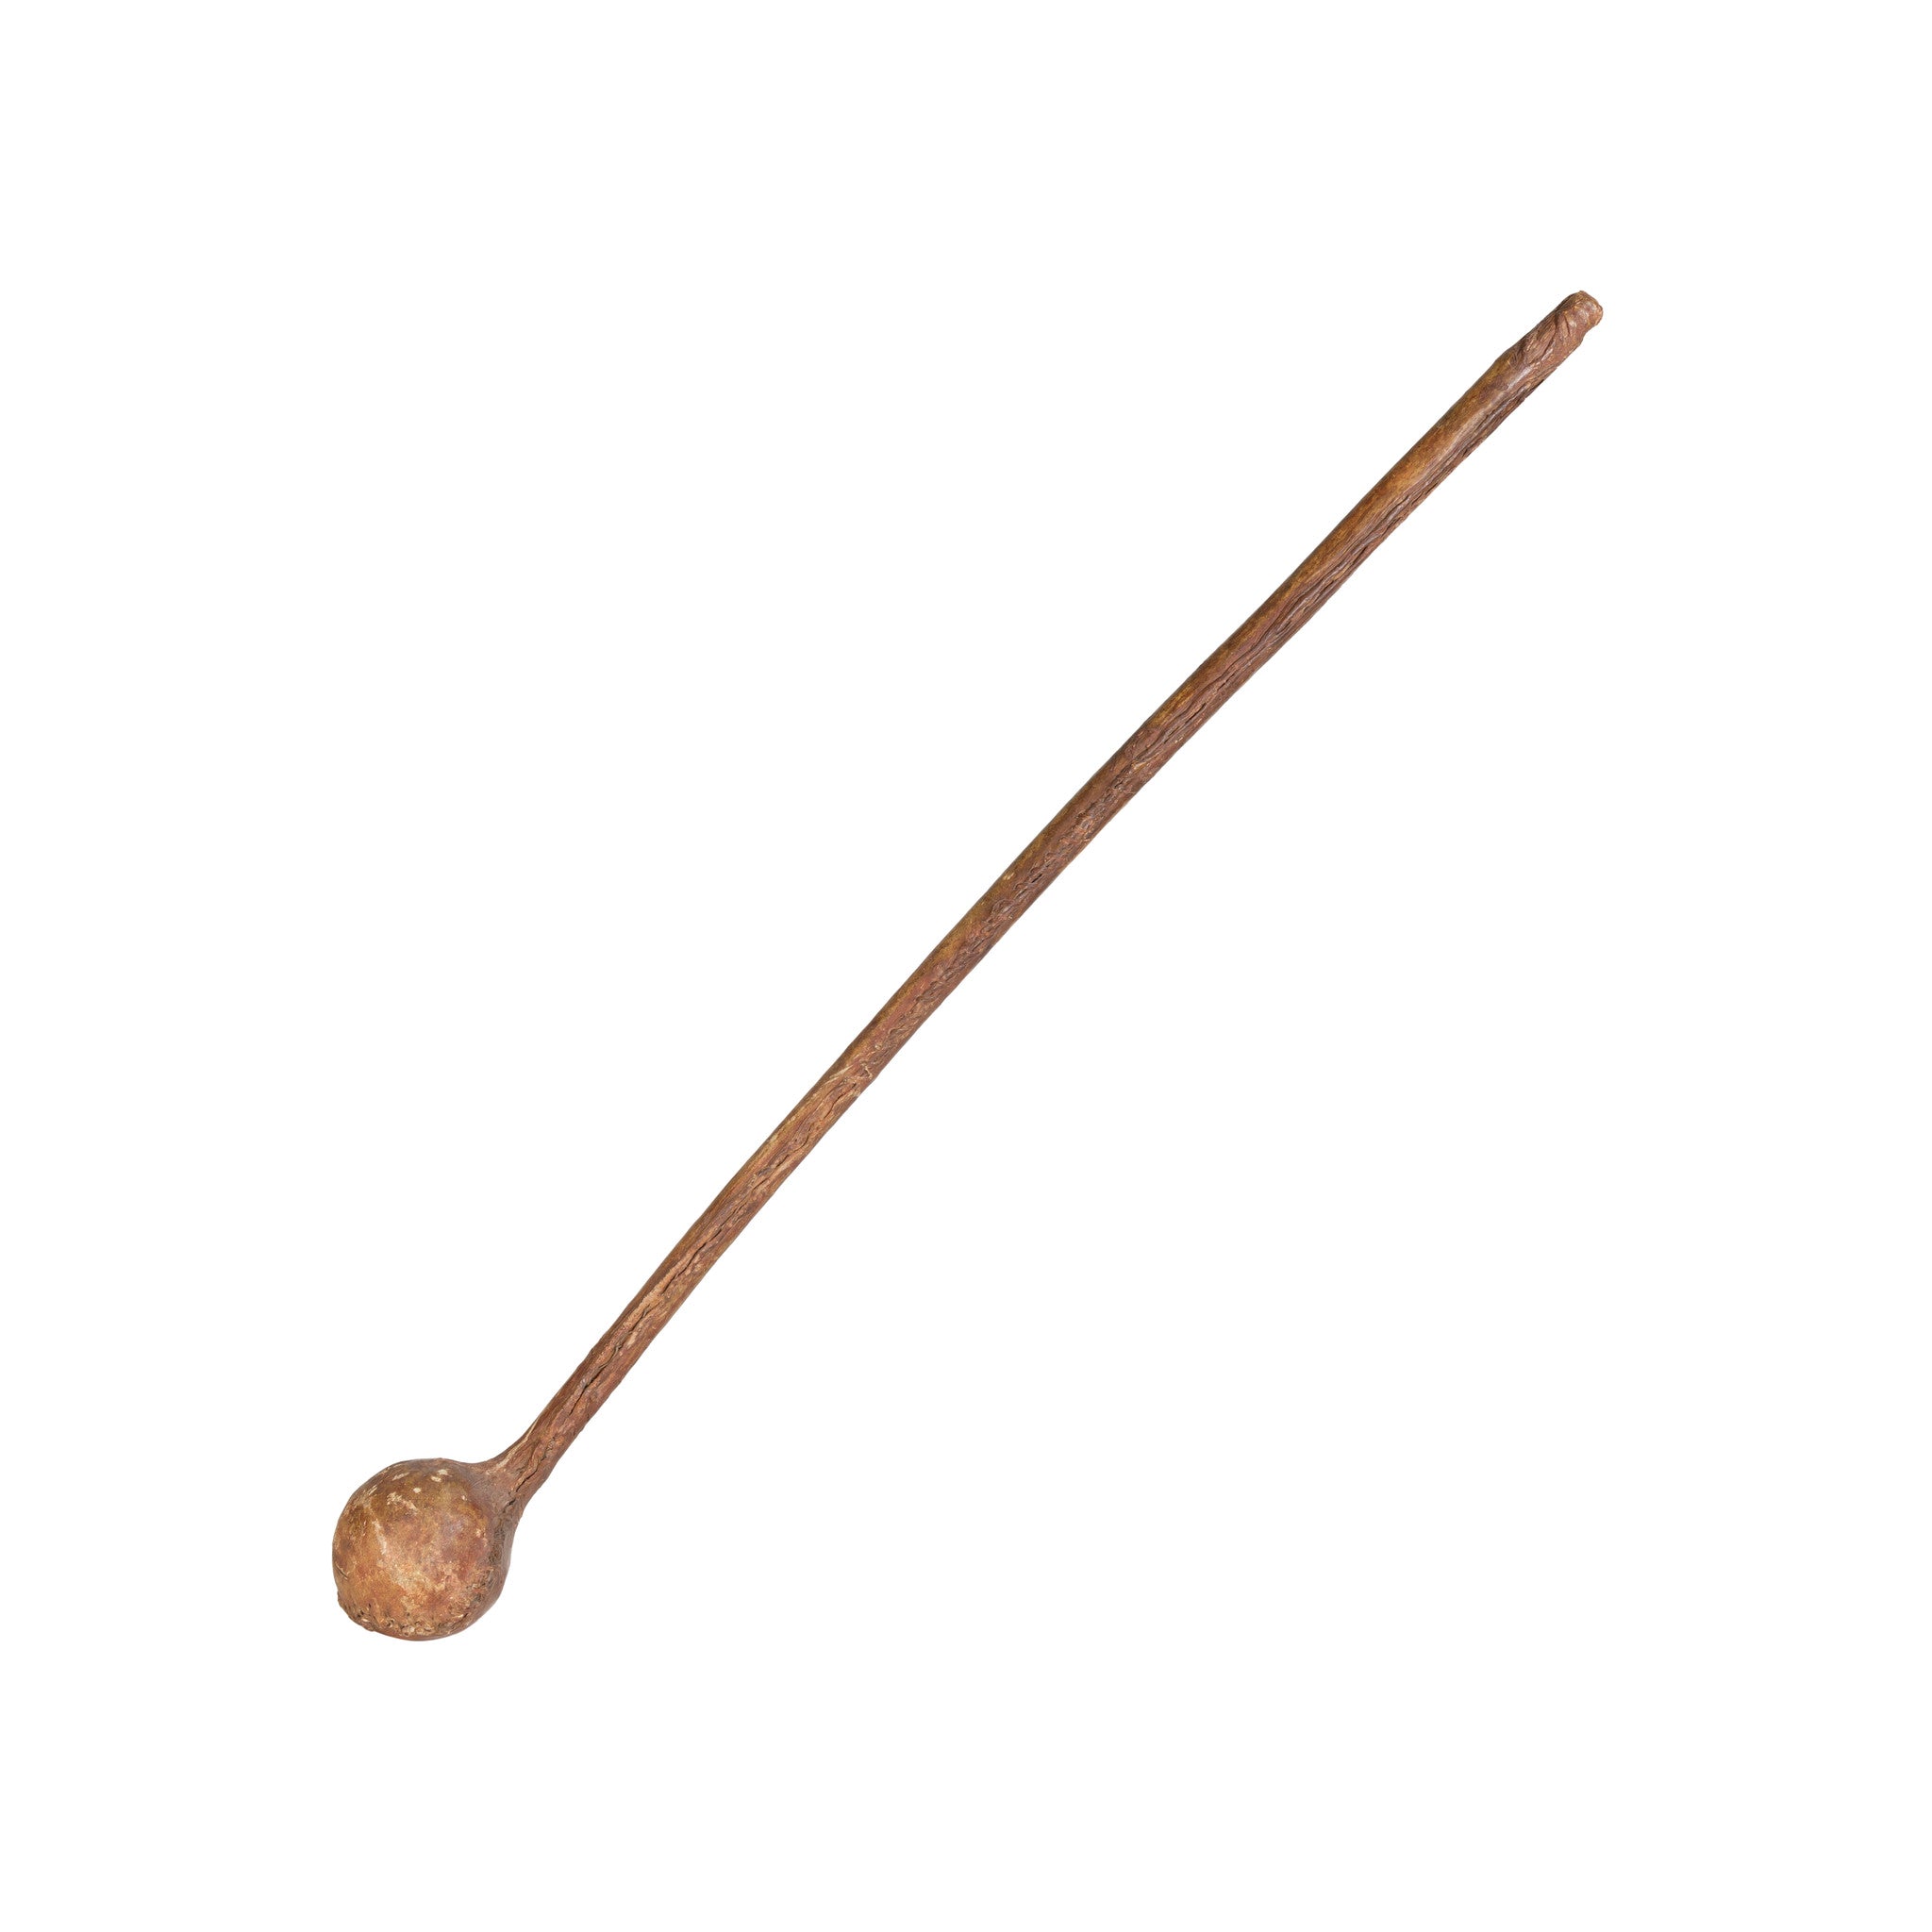 Northern Plains Wrapped Ball Club, Native, Weapon, Club